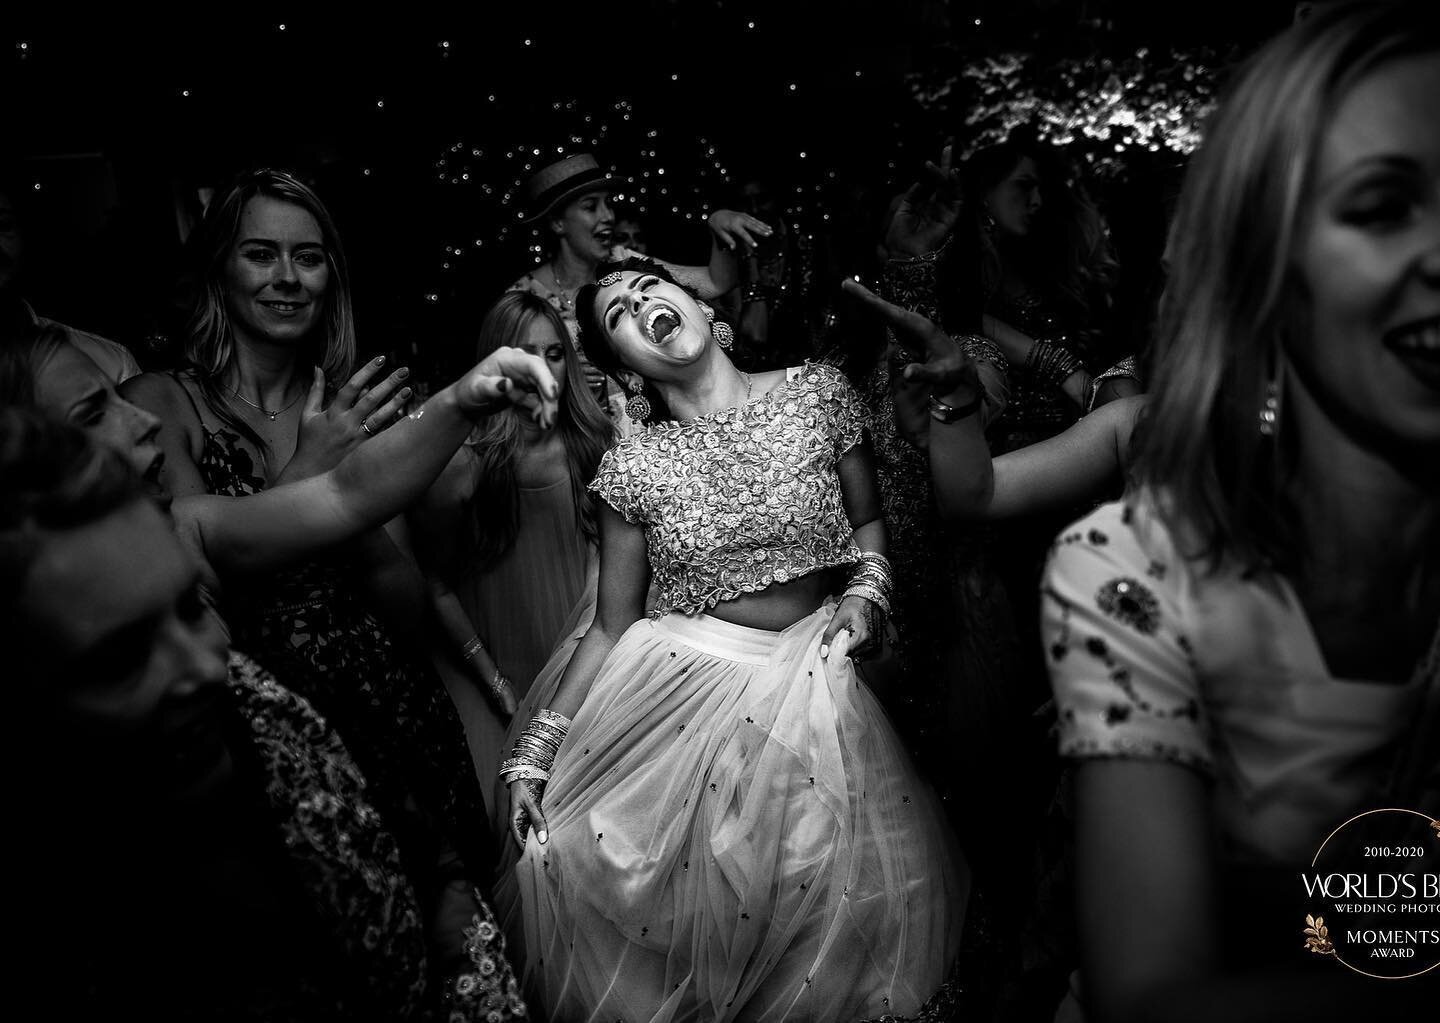 WINNER &ndash; One of 50 decisive moments of the decade

Entering wedding photography competitions gives me the opportunity to grow and continually develop my photography skills by presenting my work to a respected panel of judges and peers.
From alm